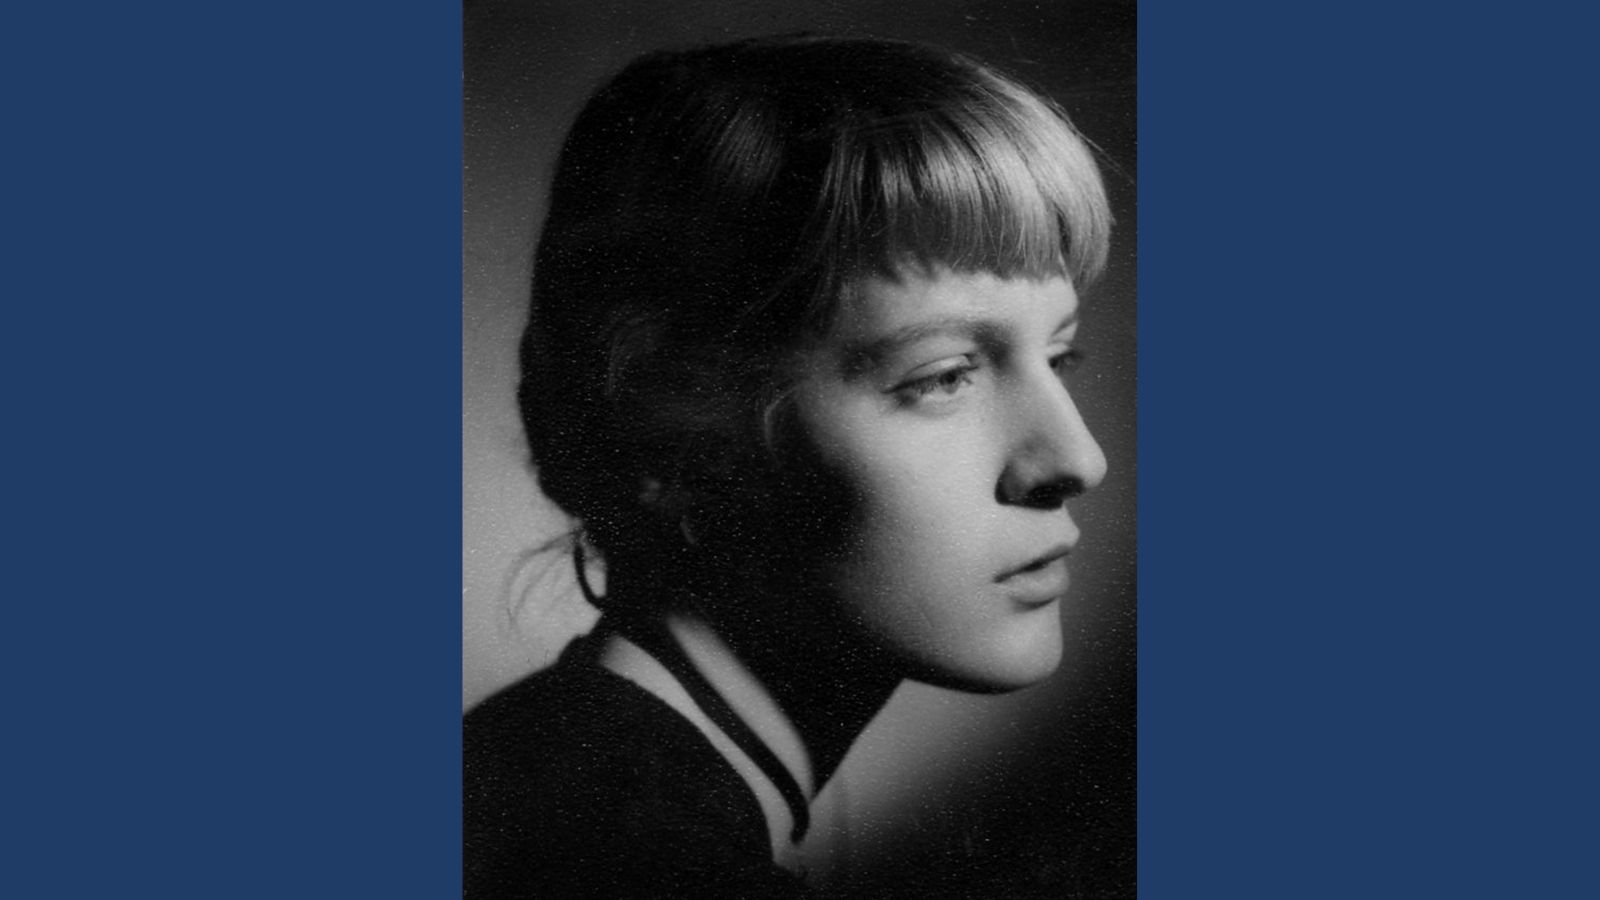 A black and white portrait photo of a young woman with tied-back blonde hair and a fringe